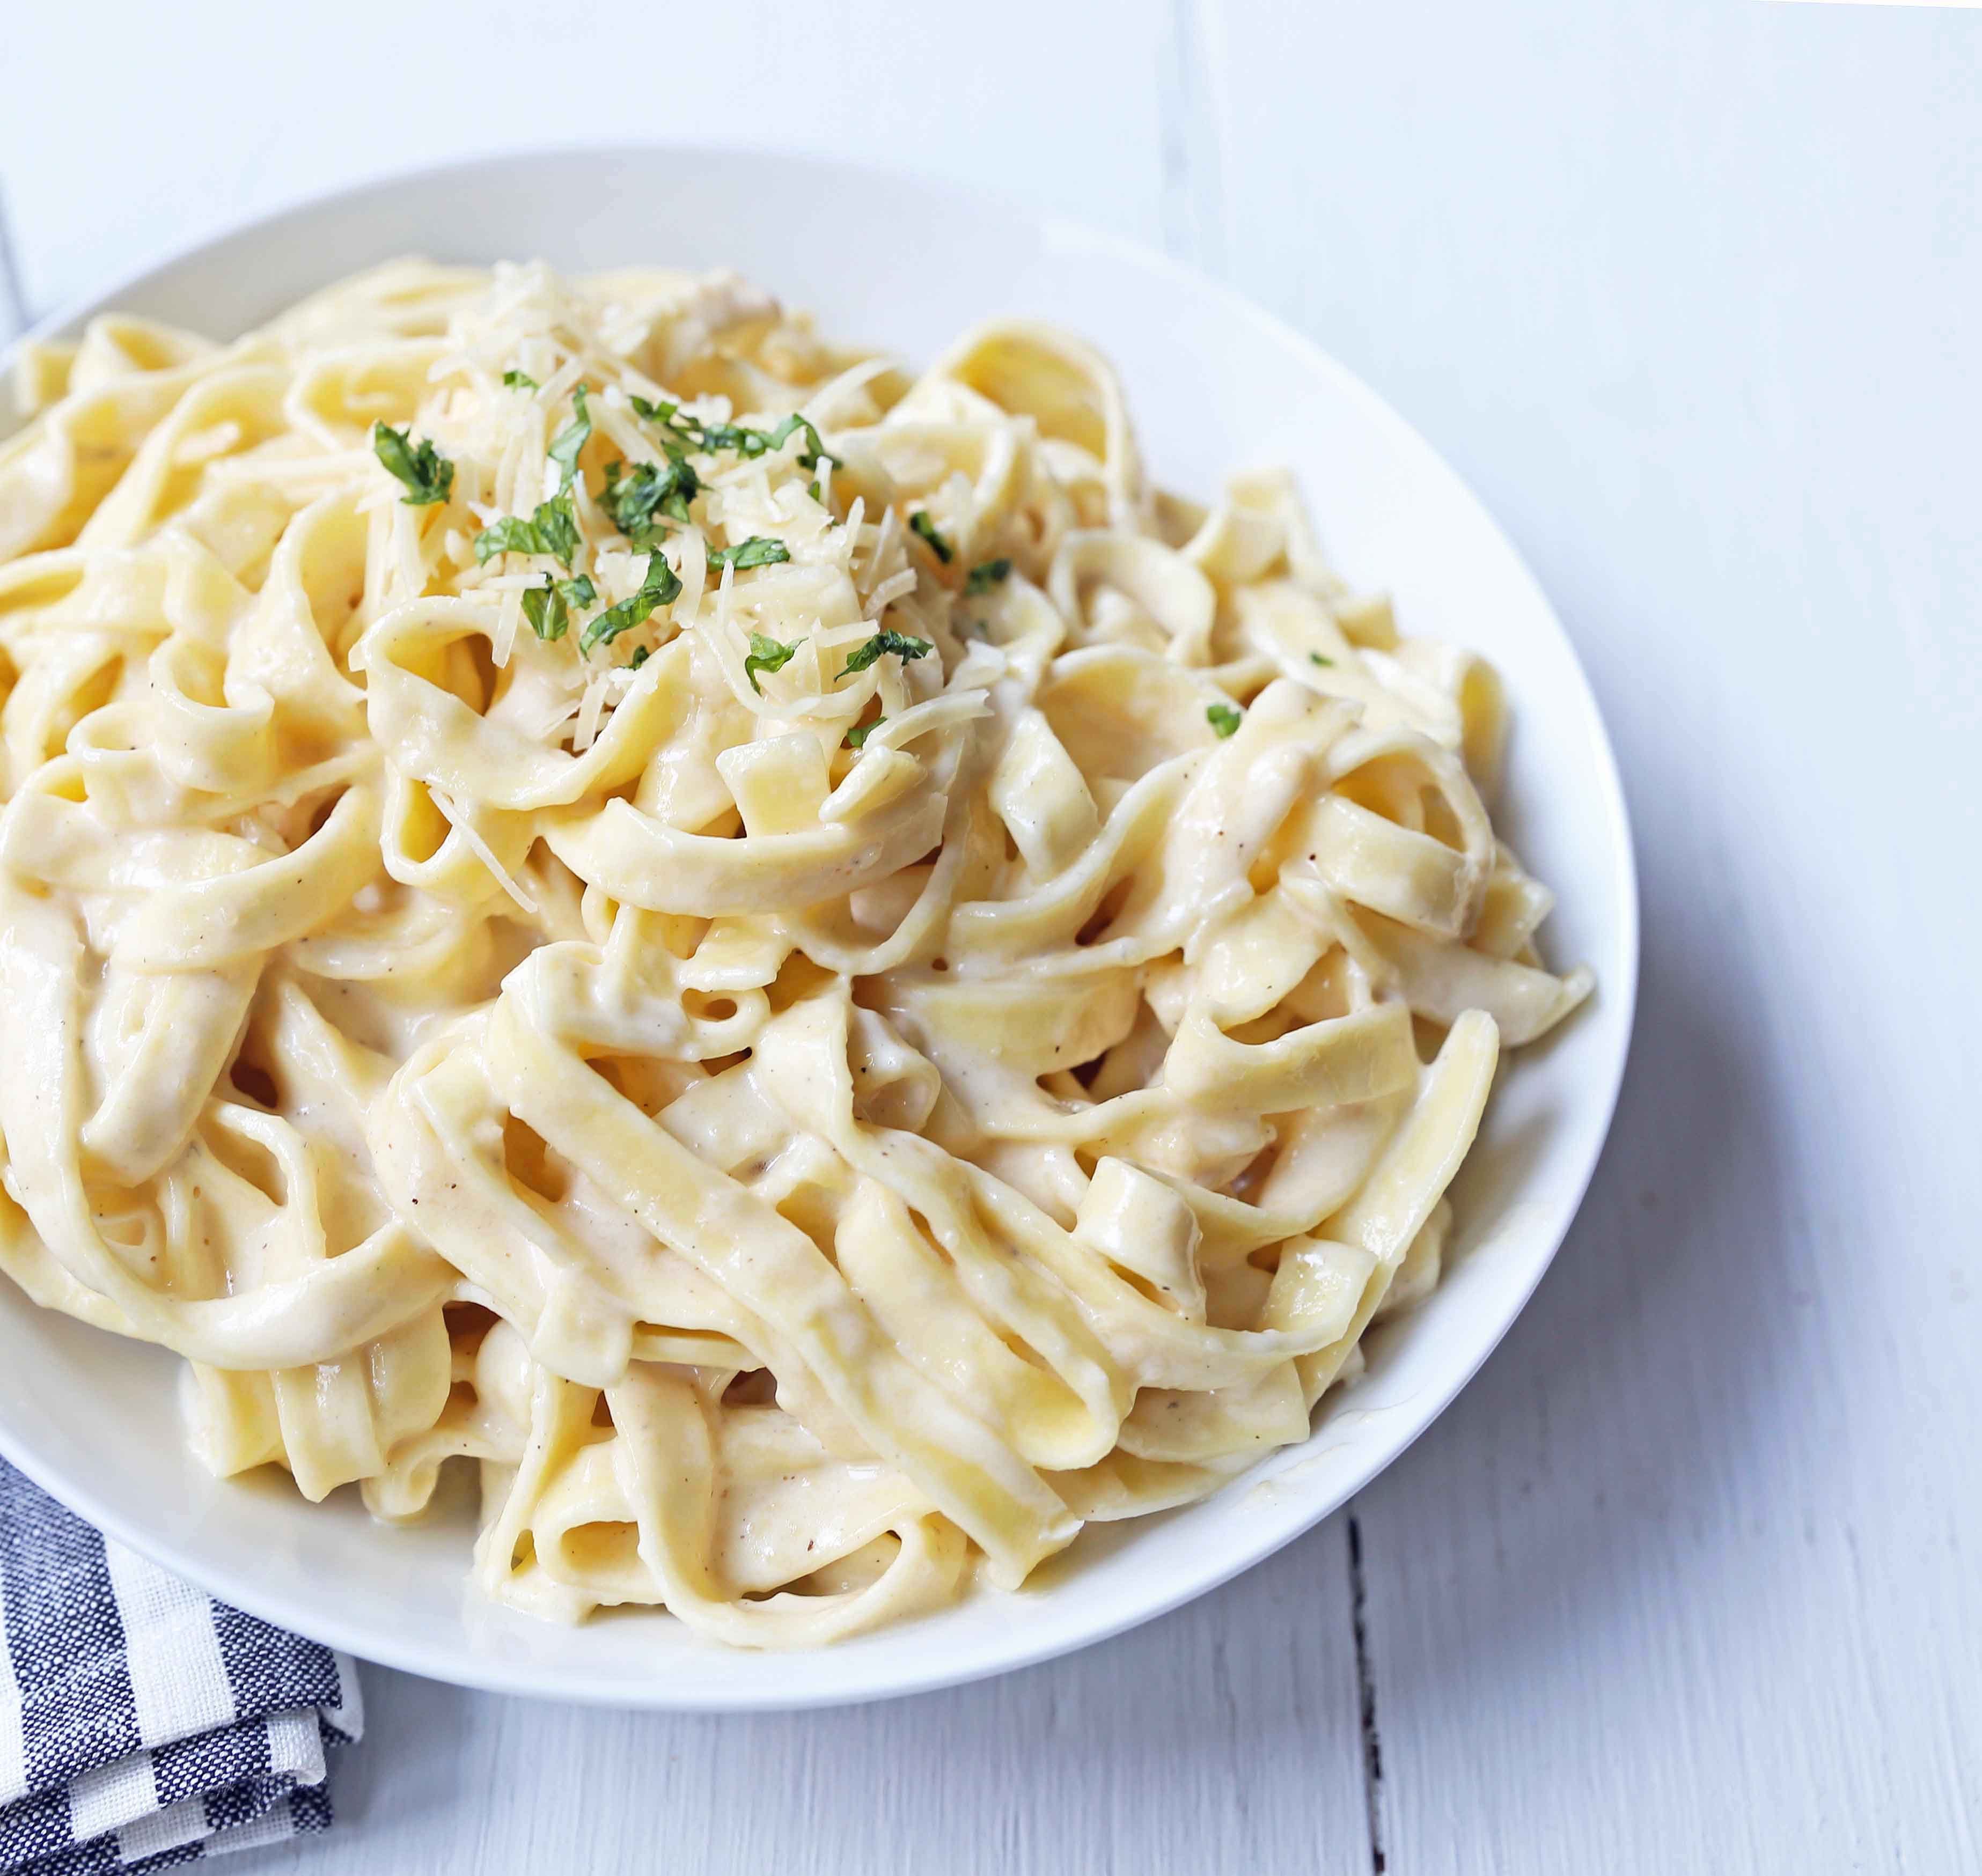 Fettuccine Alfredo Recipe. Homemade alfredo sauce made from scratch using heavy cream, butter, parmesan cheese, and a touch of garlic. The BEST Fettuccine Alfredo Recipe! www.modernhoney.com #fettccinealfredo #pasta